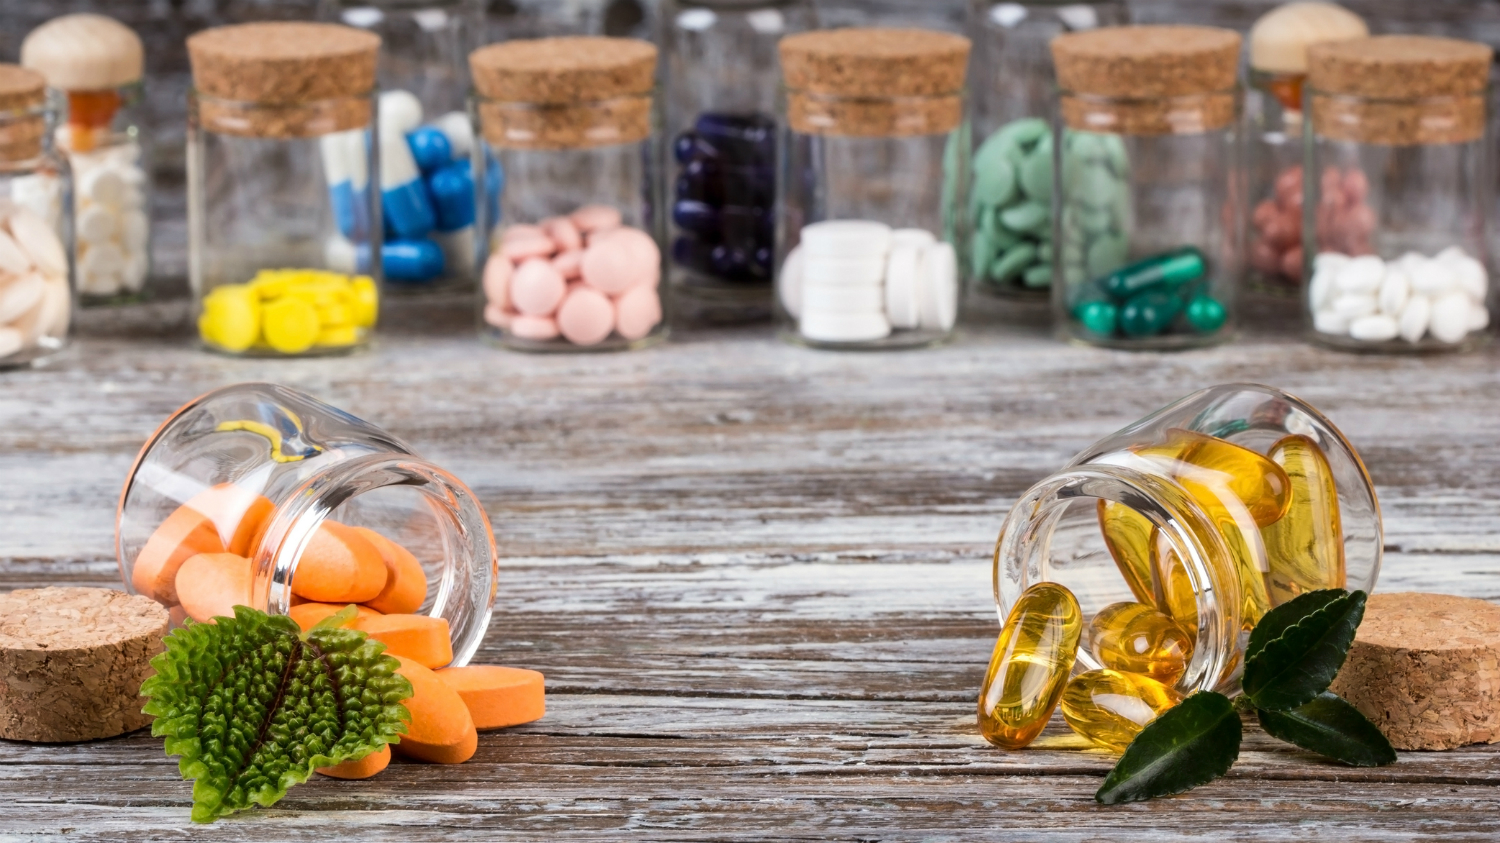 Dietary supplement Market 2018 - Global Industry Trends, Growth, and Forecast till 2023